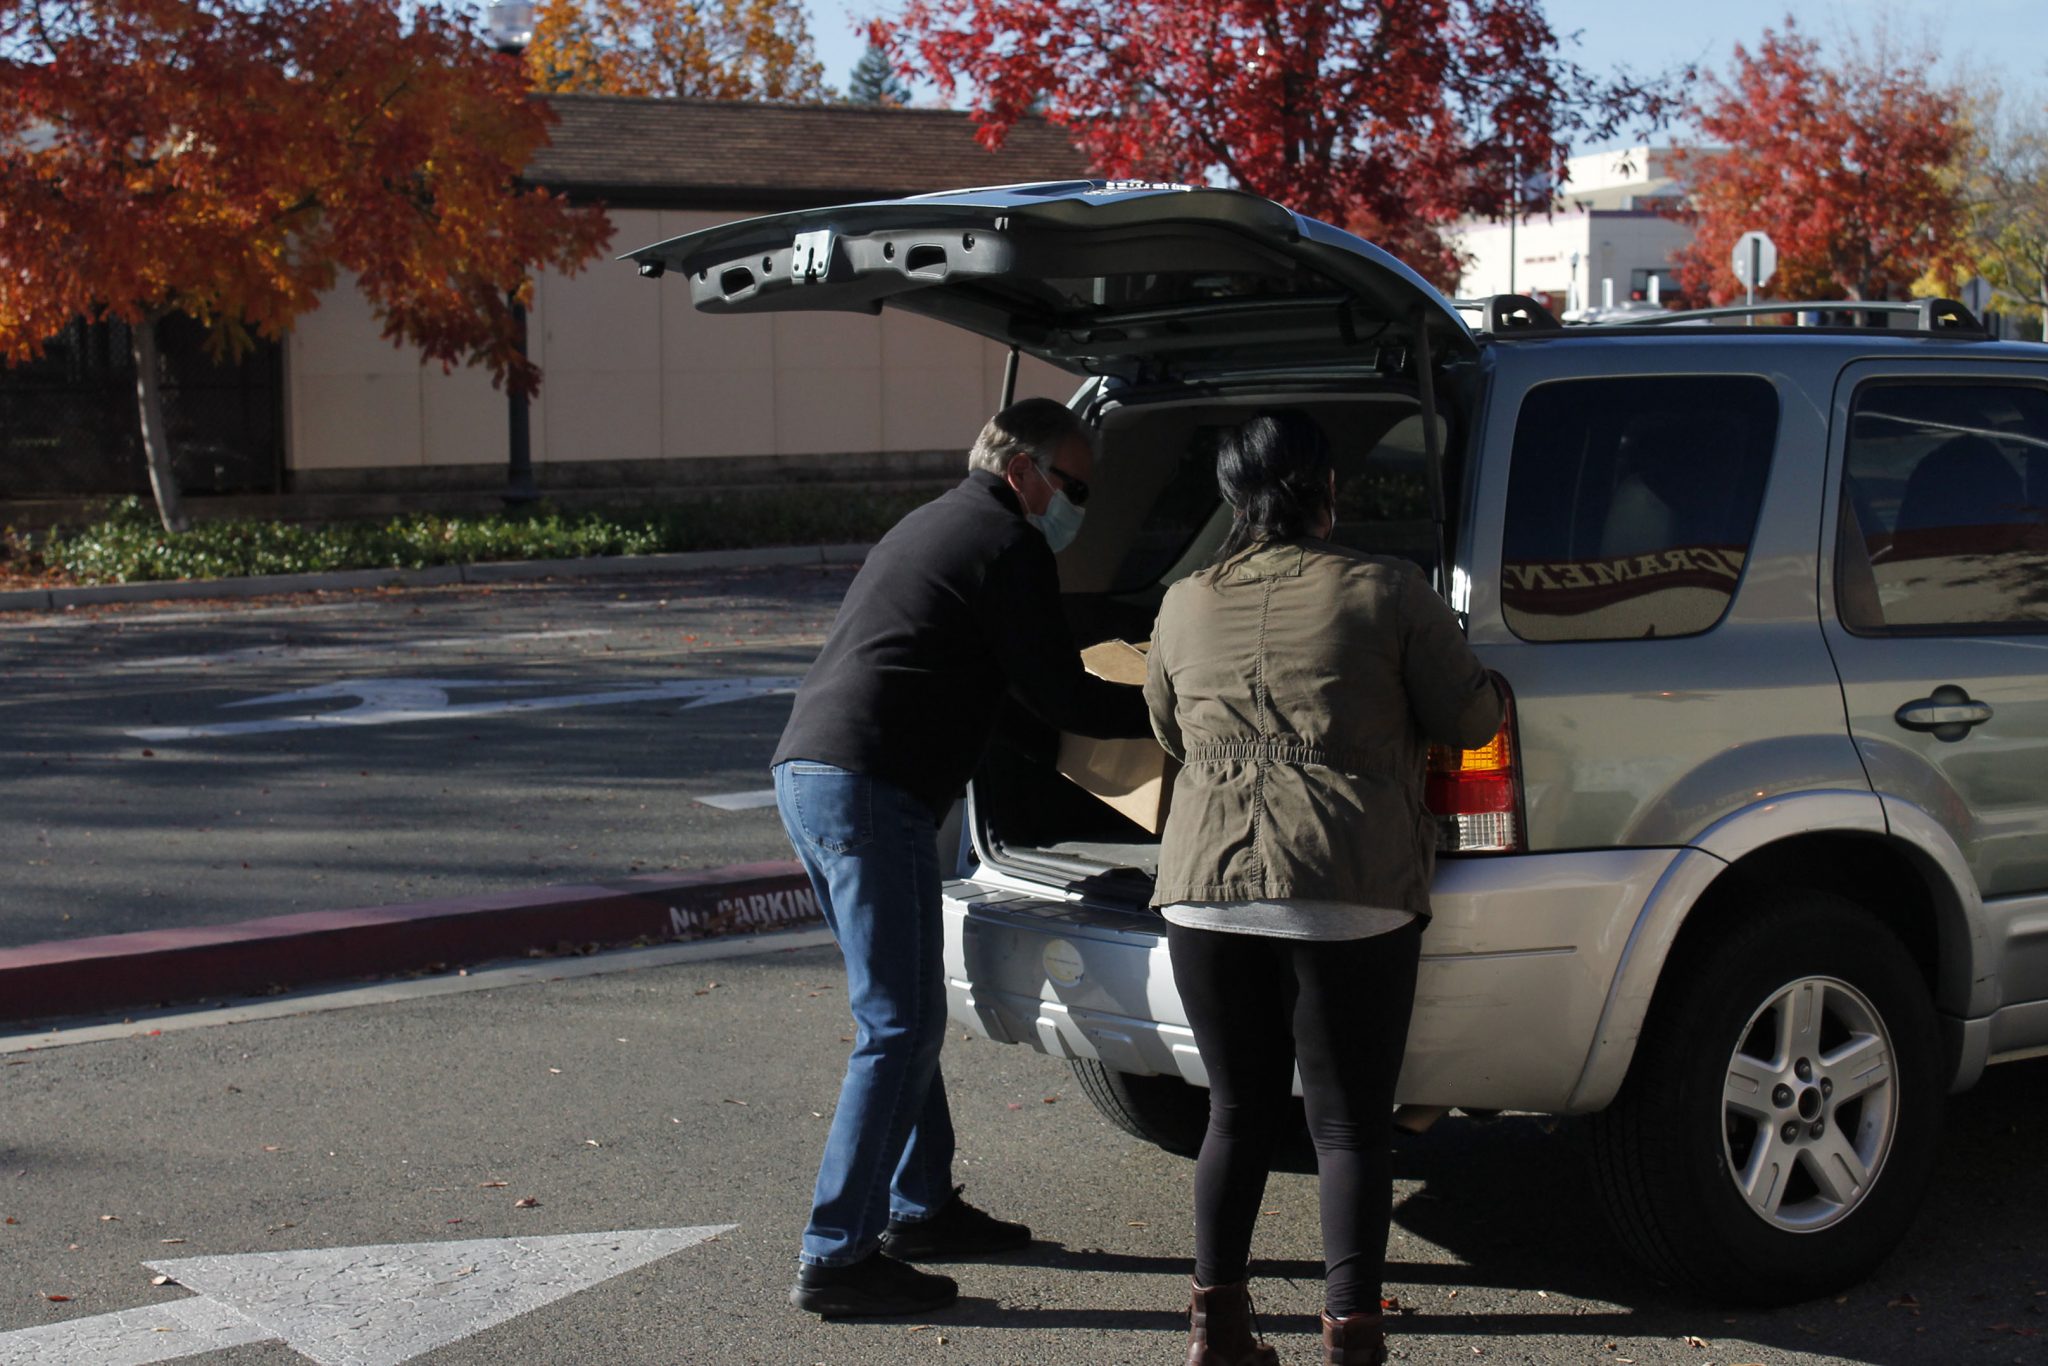 Adjunct assistant photography professor Gordon Lazzarone and R.I.S.E. student support specialist Valerie Lockhart distribute food to a student's trunk while maintaining distance in accordance with COVID-19 protocol. (Shelby Tolly/stolly.express@gmail.com)